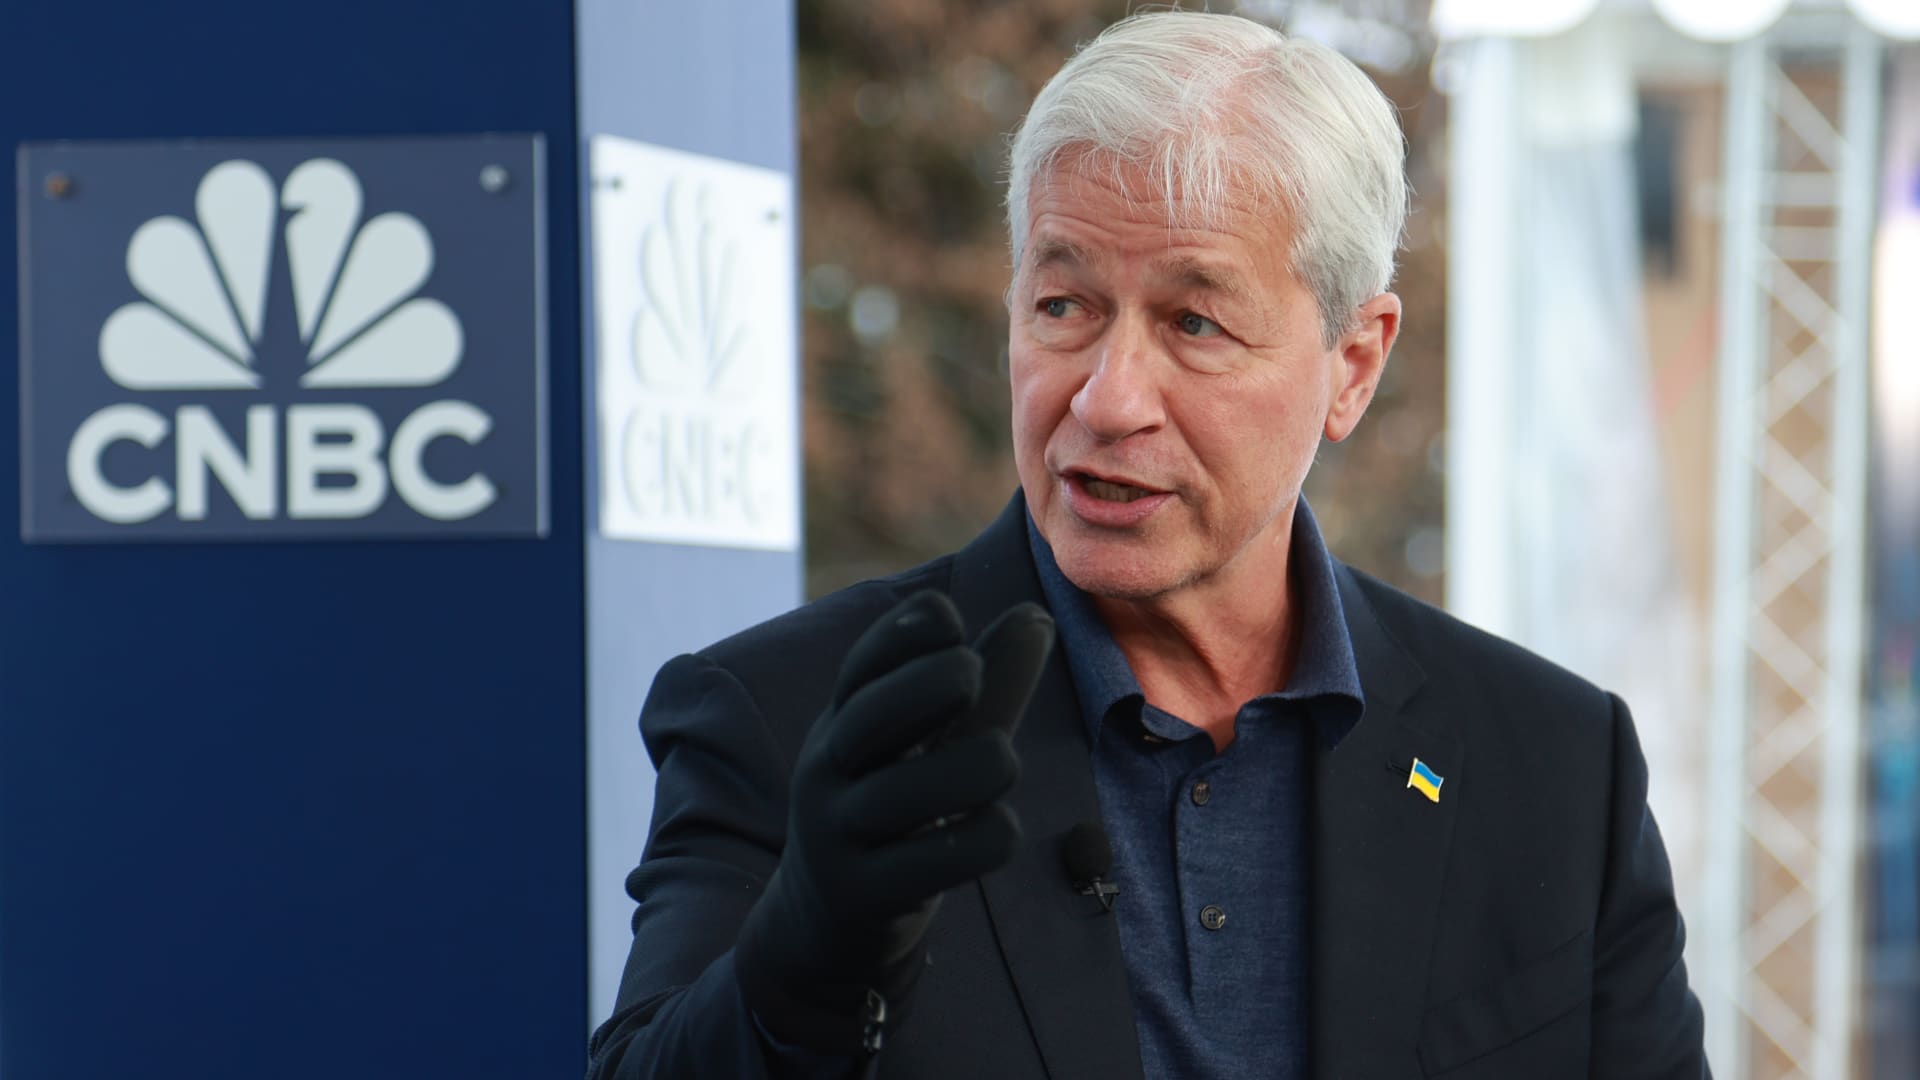 Jamie Dimon says he's done talking about bitcoin: ‘I don't care’